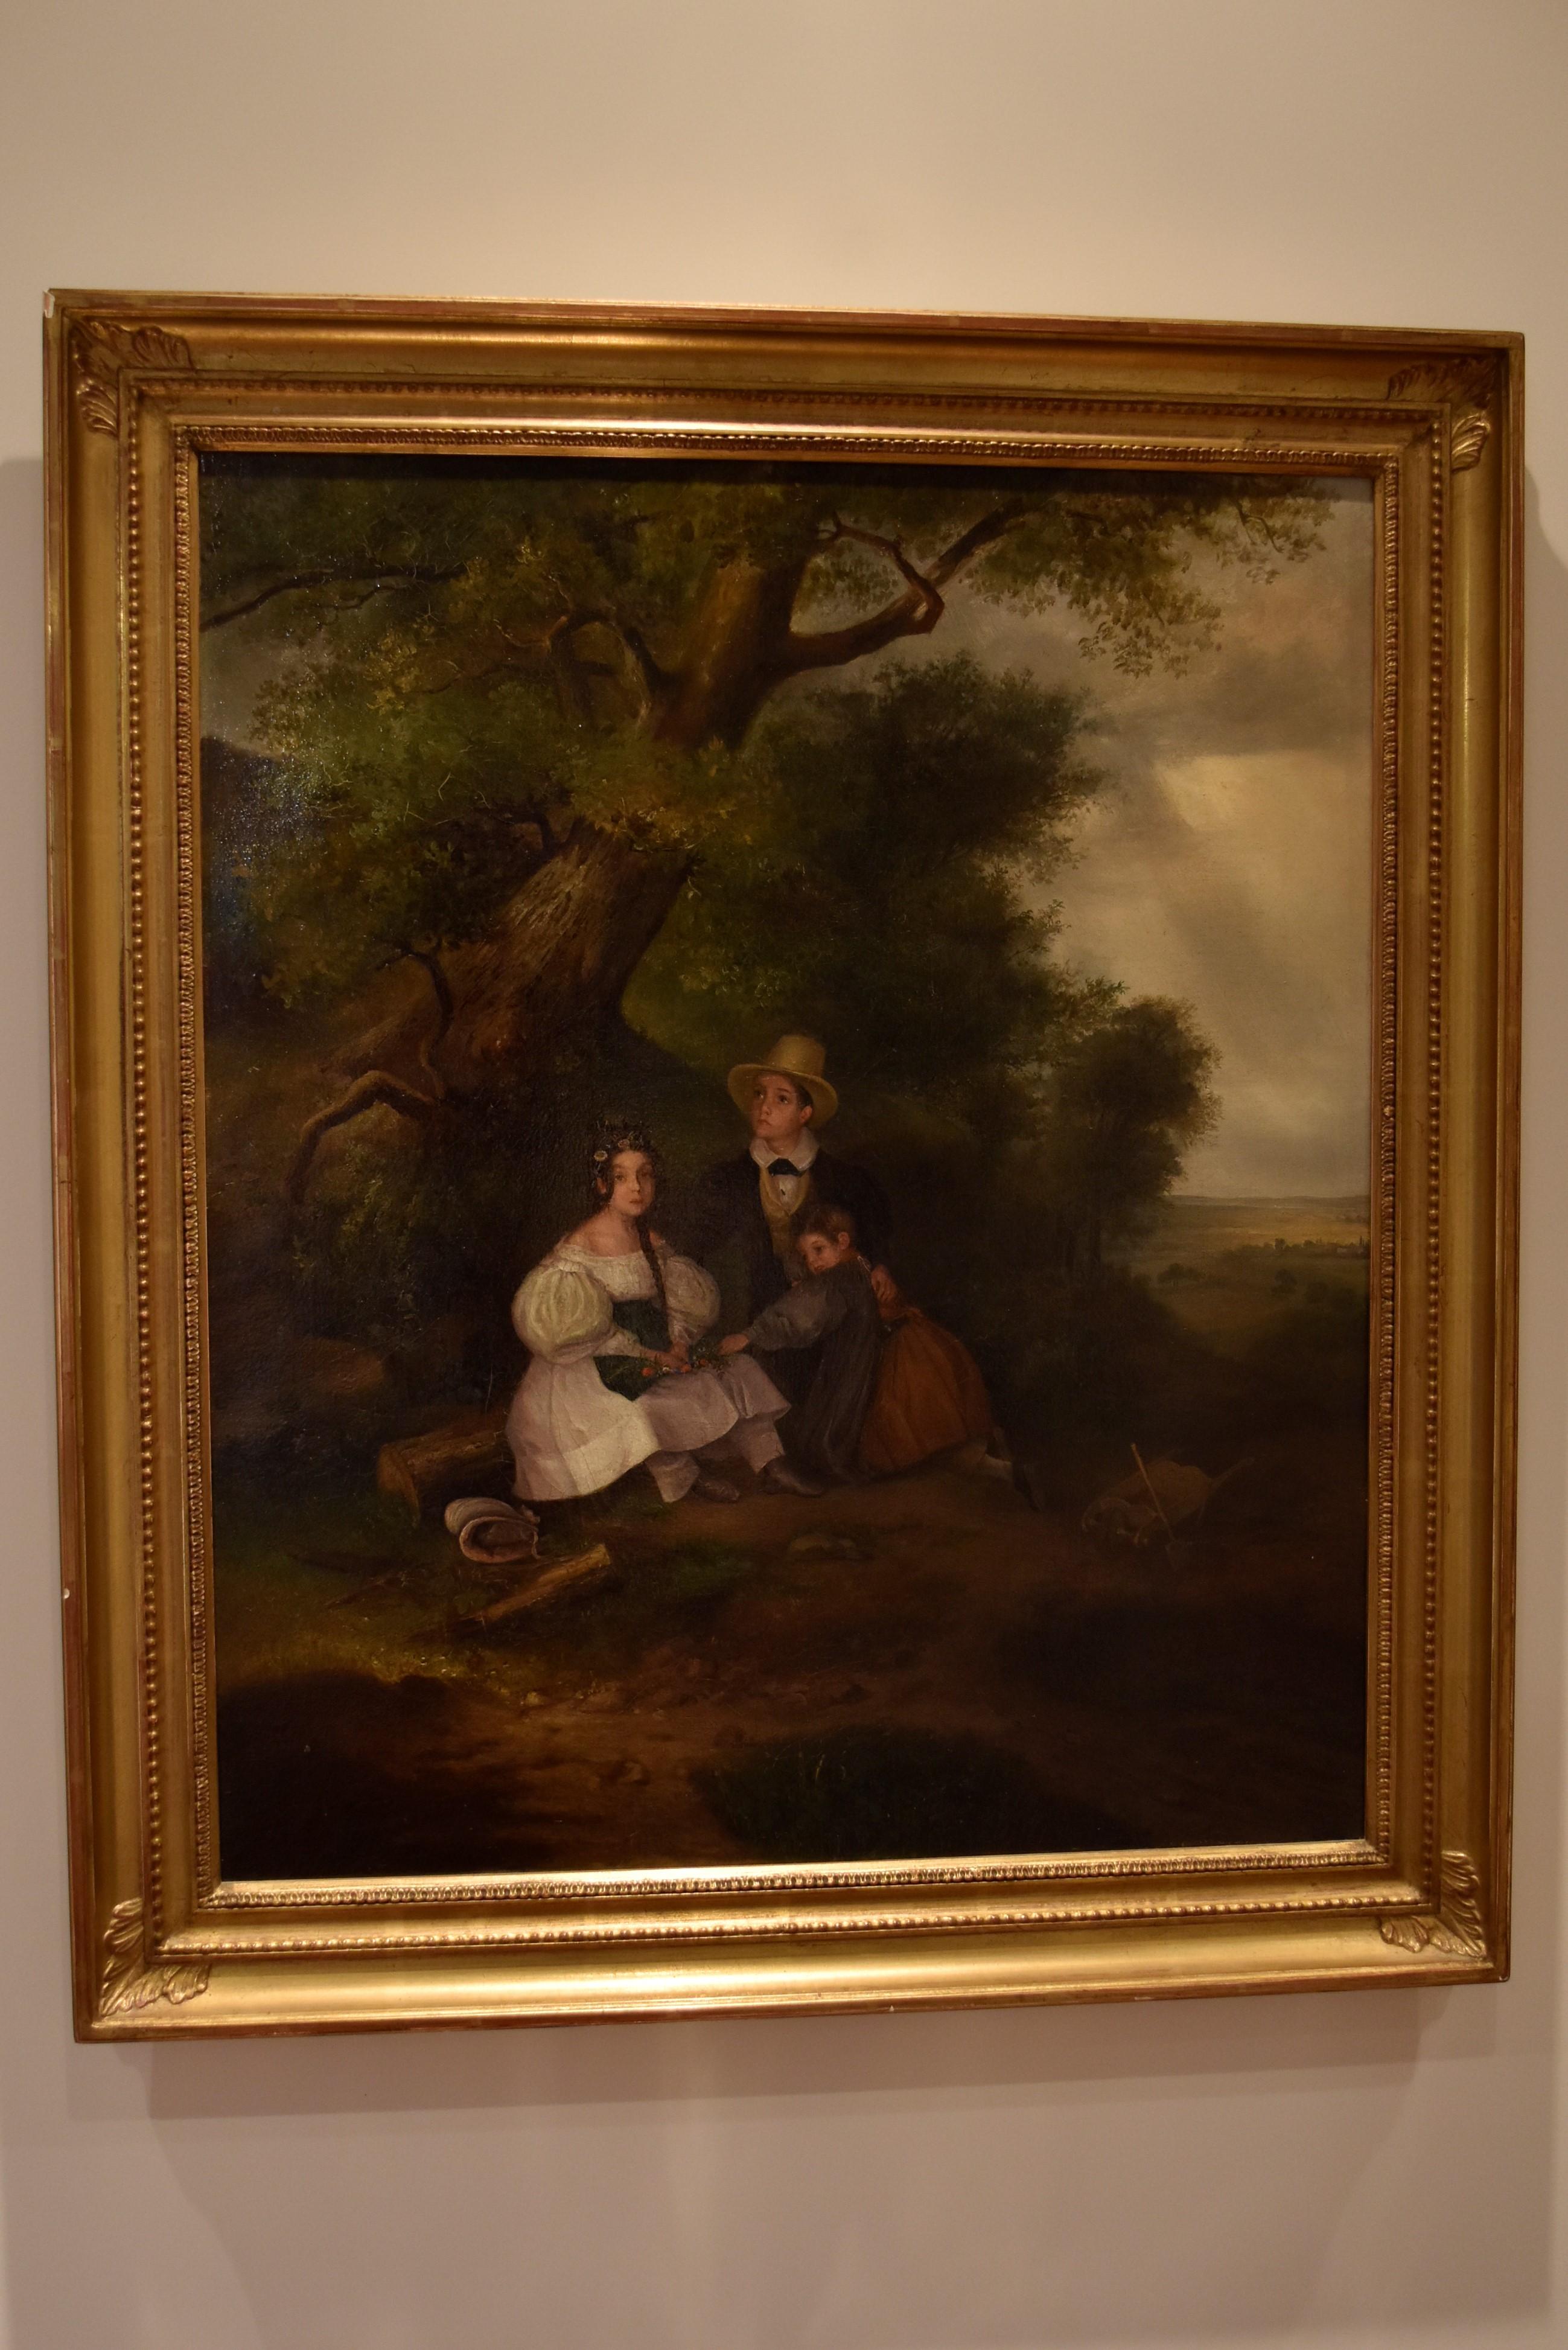 English School circa 1830
Three children under a tree during a storm
Oil on canvas
recently relined
55 x 46.5  cm
Framed : 64 x 55.5 cm (some lacks in the gilding, please see the pictures)